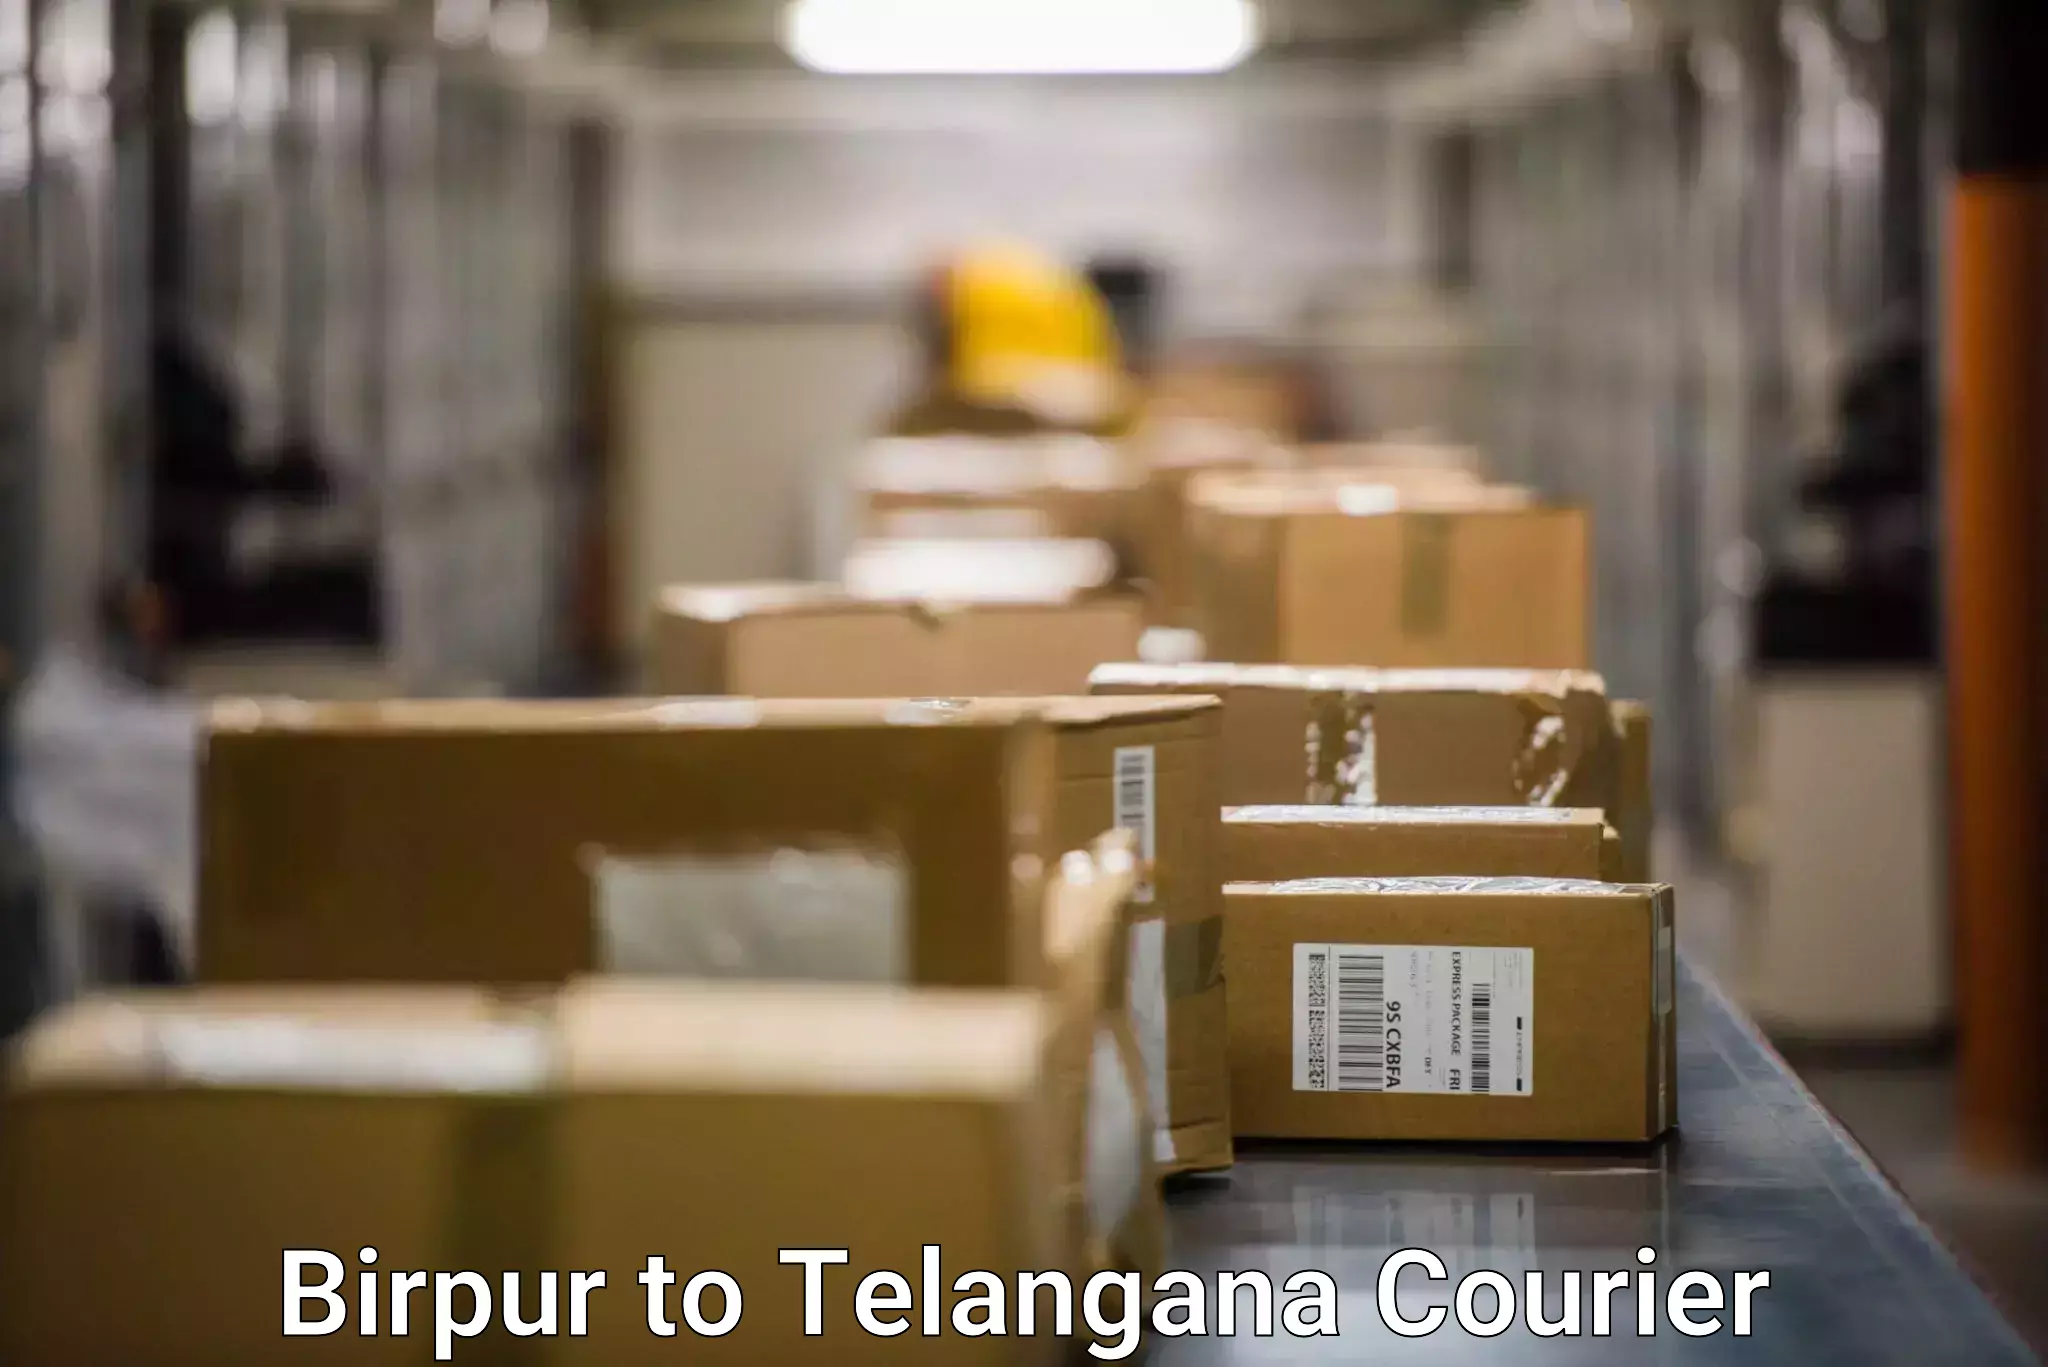 Courier service booking Birpur to Telangana